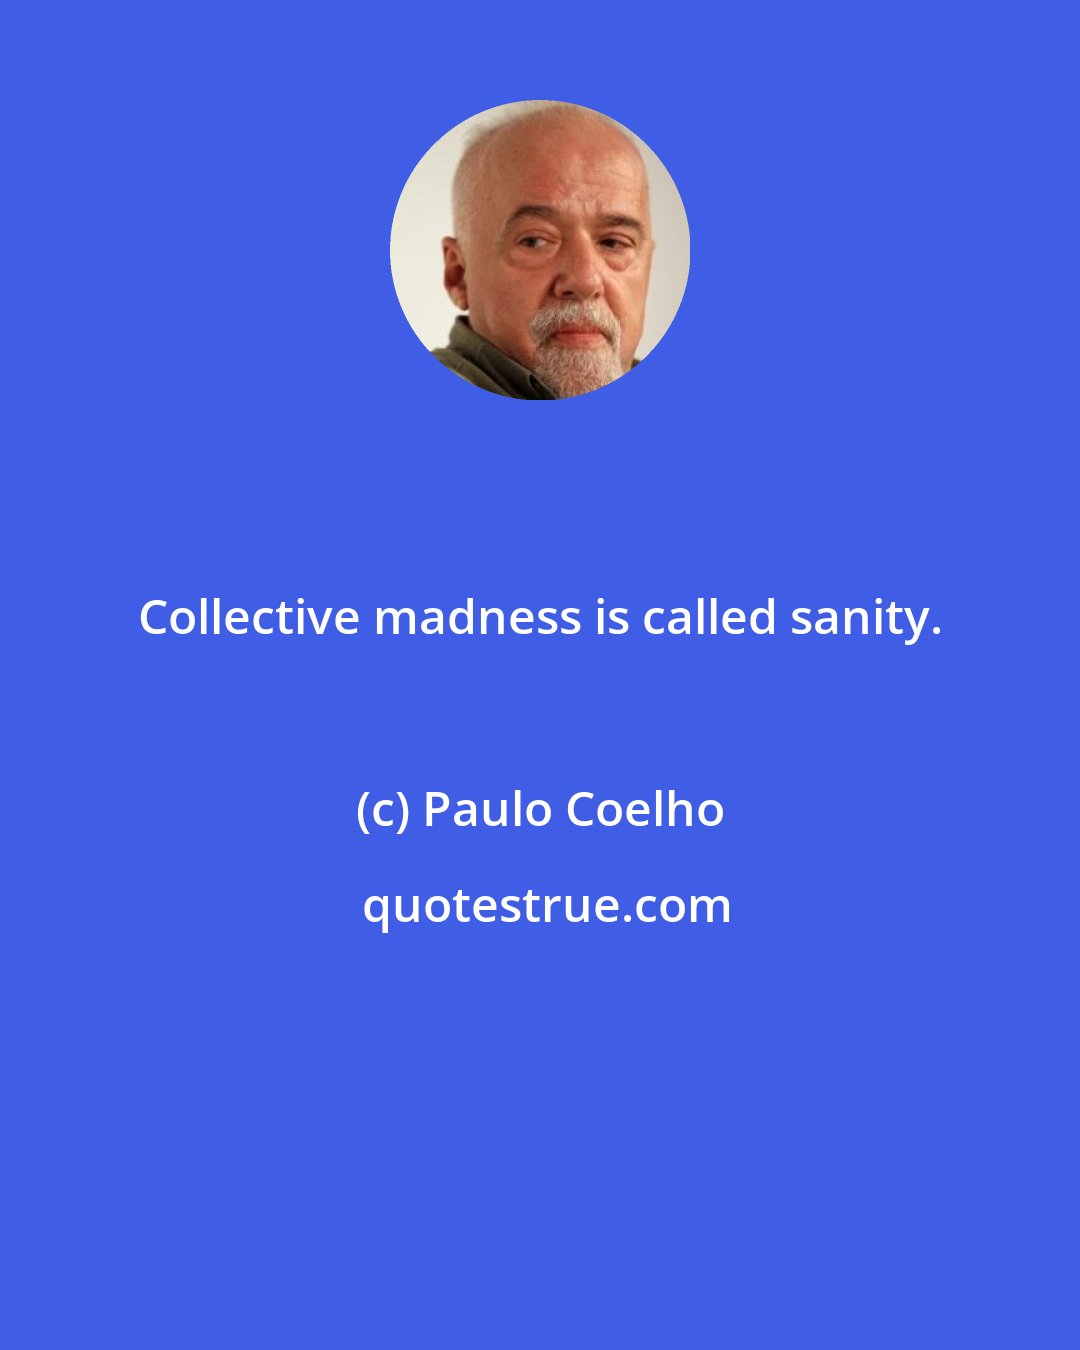 Paulo Coelho: Collective madness is called sanity.